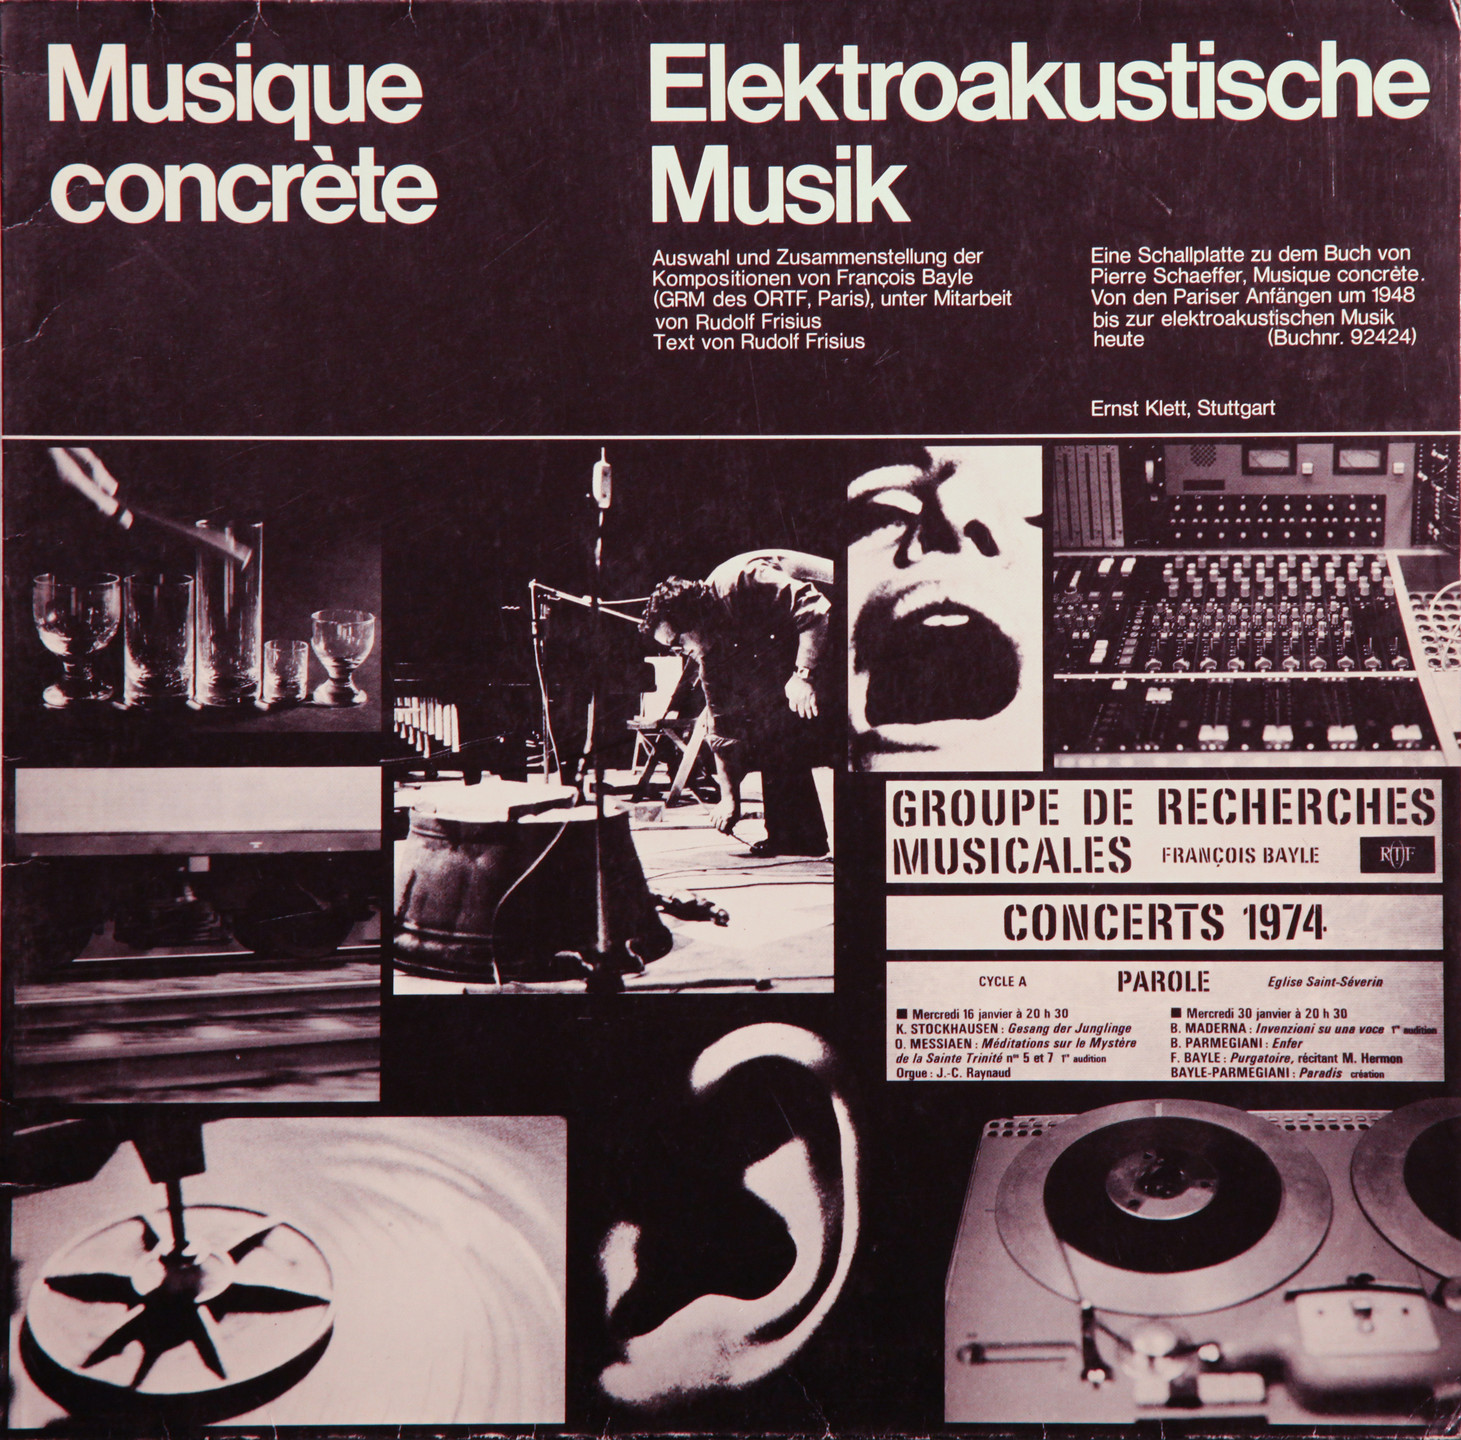 electrocd — The electroacoustic music store